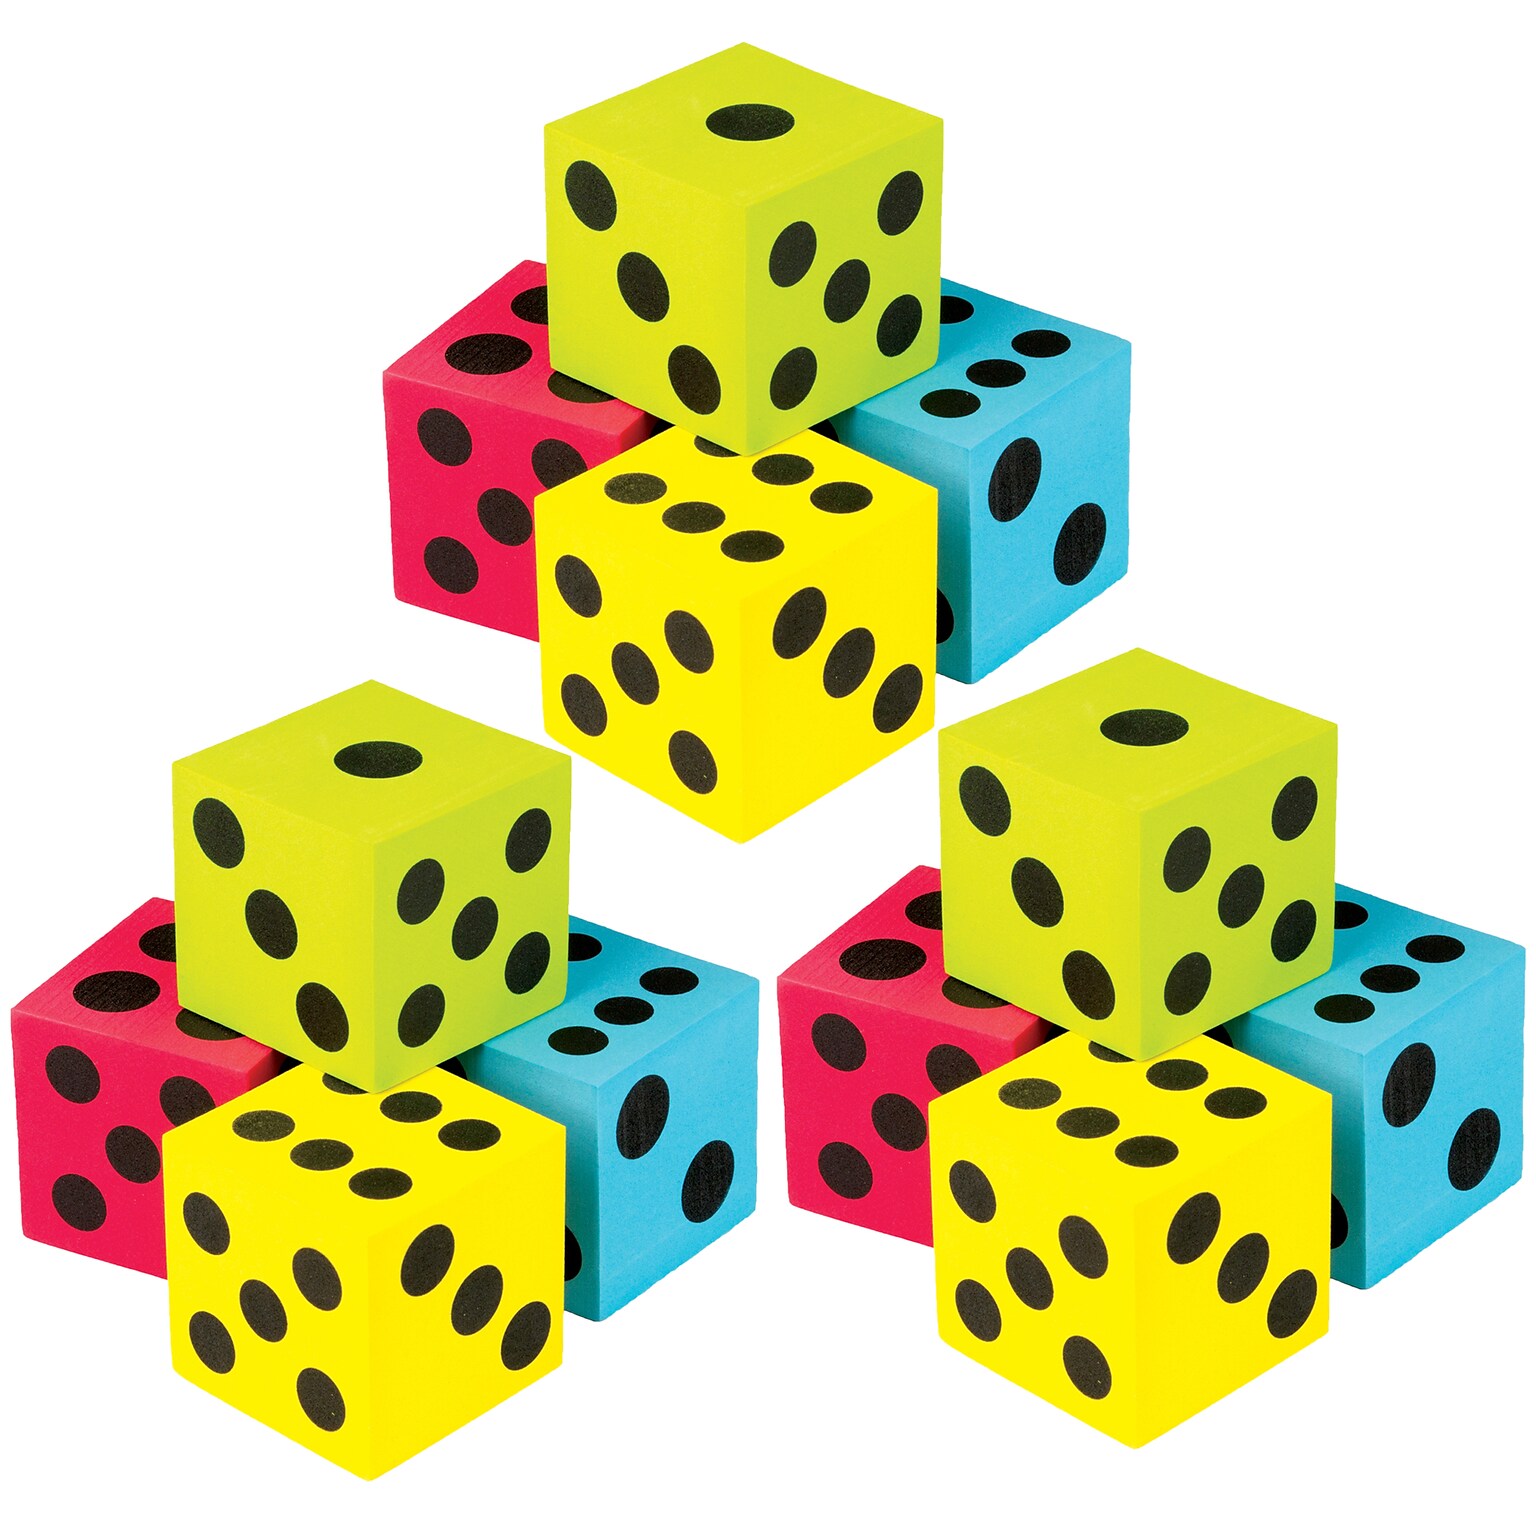 Teacher Created Resources Foam Colorful Jumbo Dice, 4 Per Pack, 3 Packs (TCR20810-3)